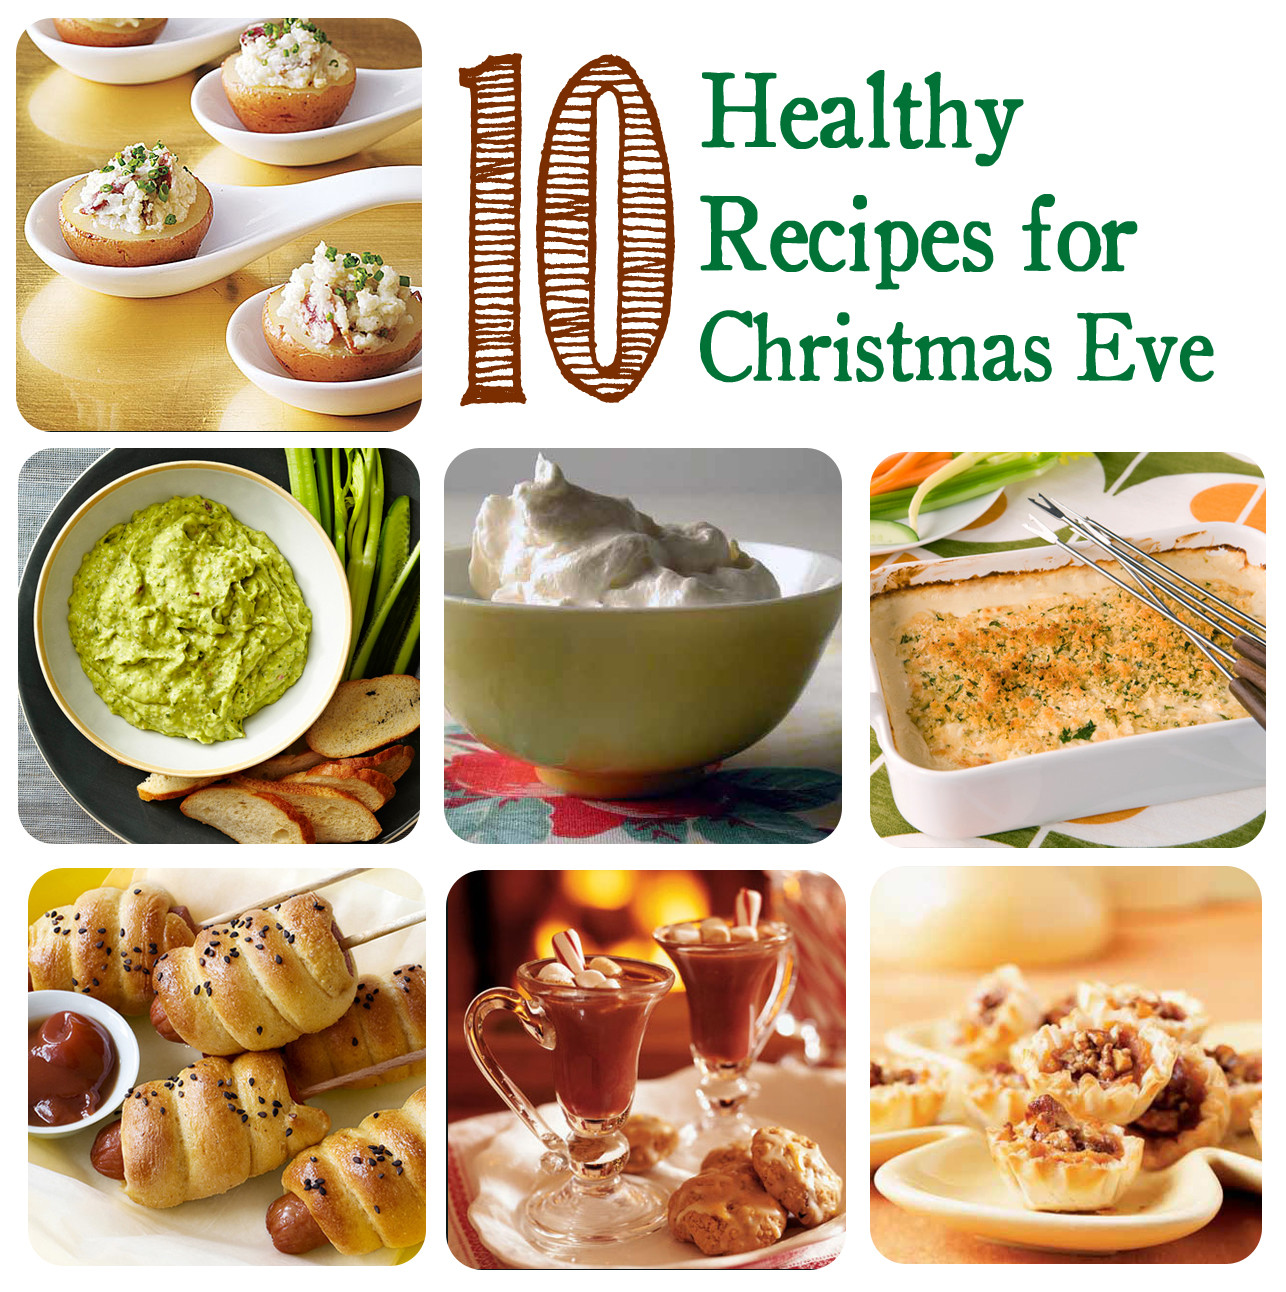 Christmas Eve Appetizers
 My Inspired Home Christmas Eve Healthy Appetizers